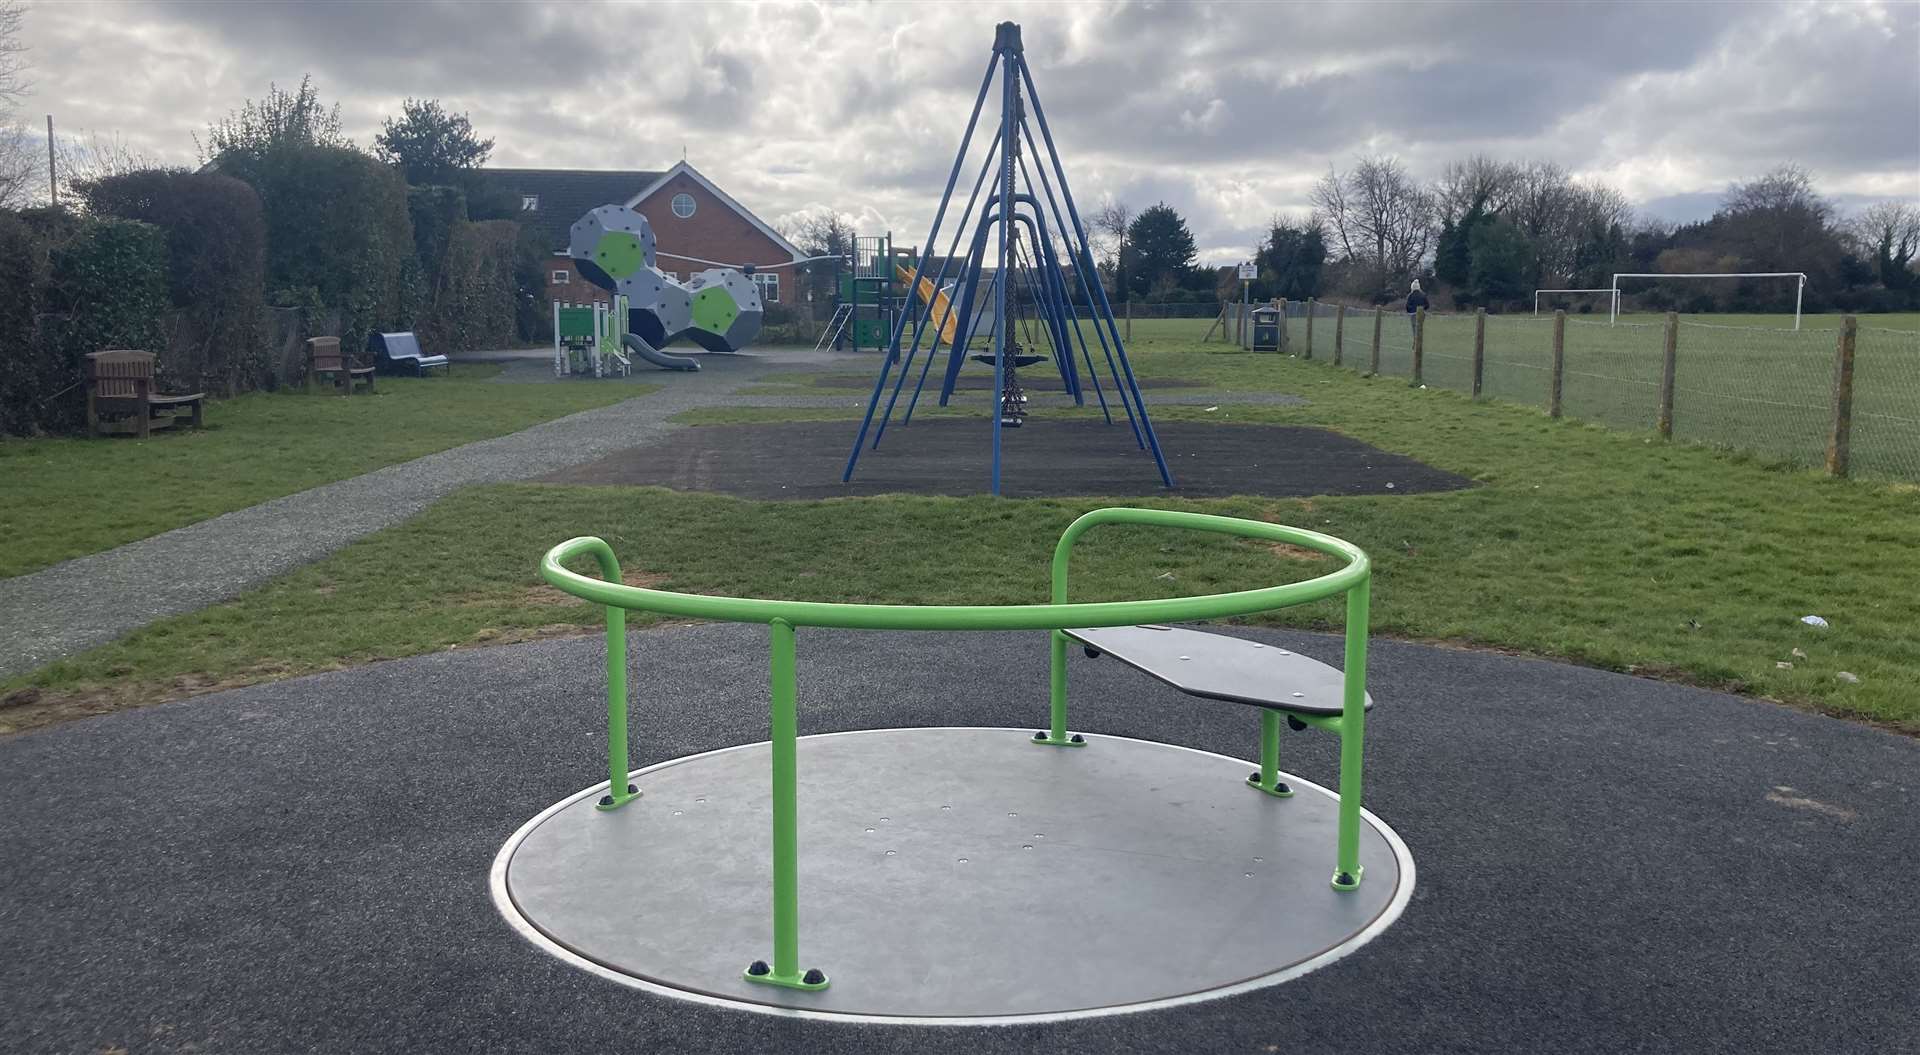 A new roundabout has been installed along with swings and climbing frames